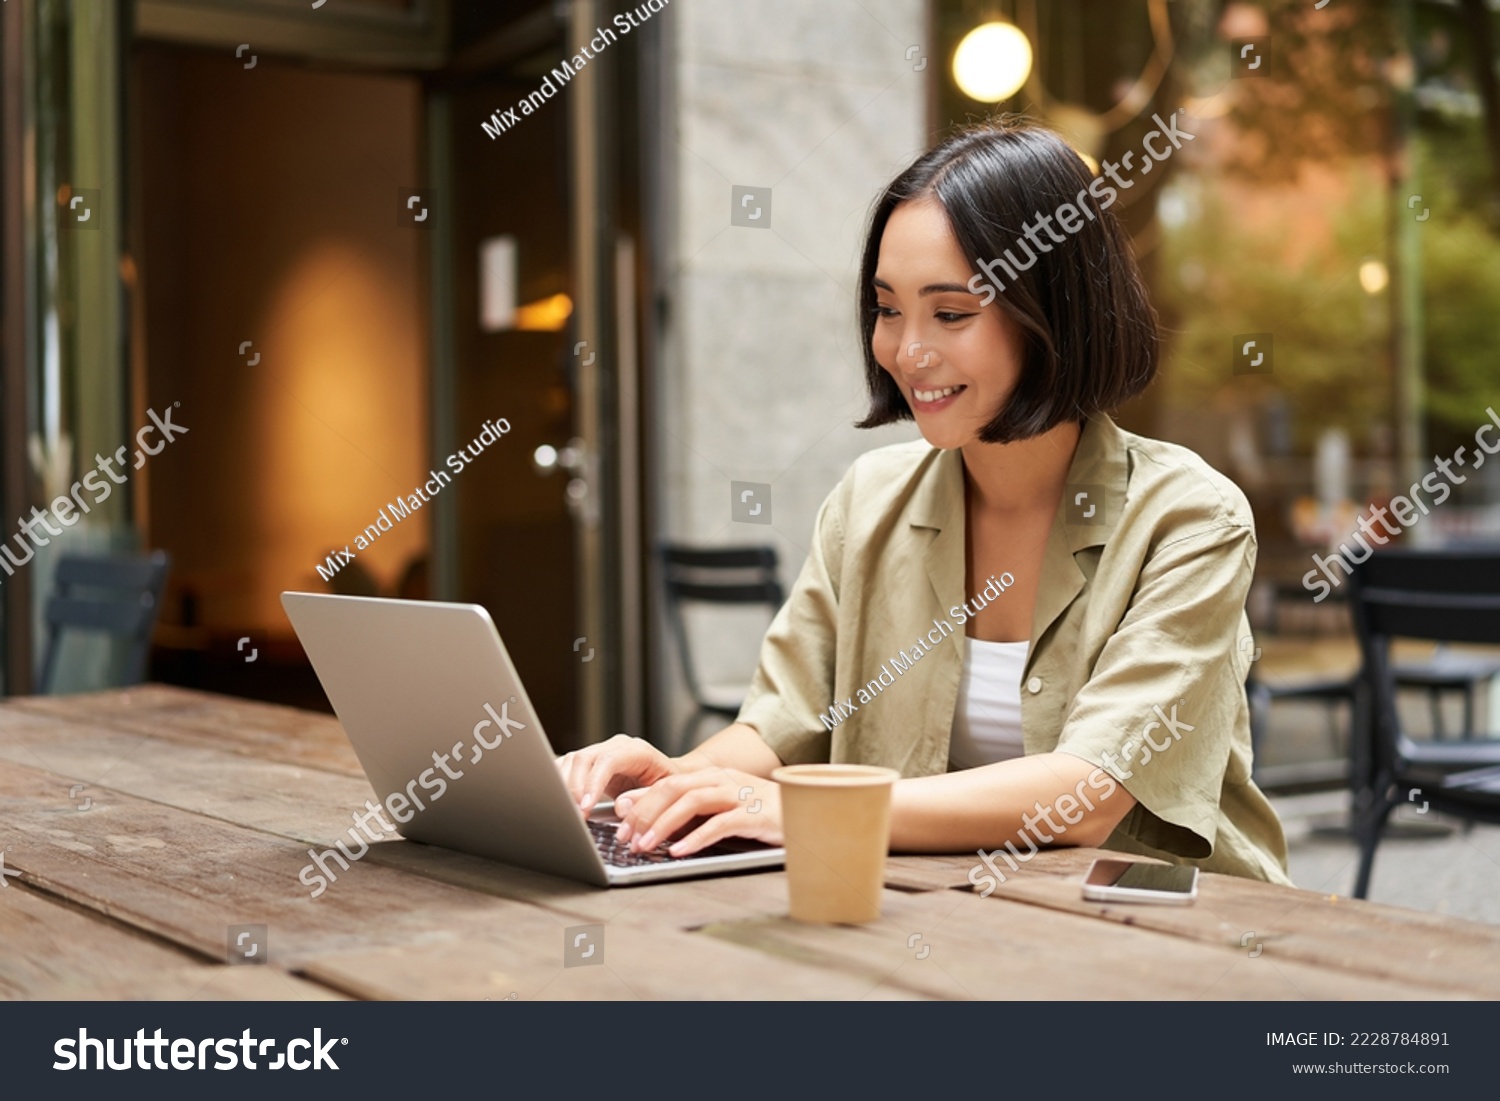 Young asian woman, digital nomad working remotely from a cafe, drinking coffee and using laptop, smiling. #2228784891